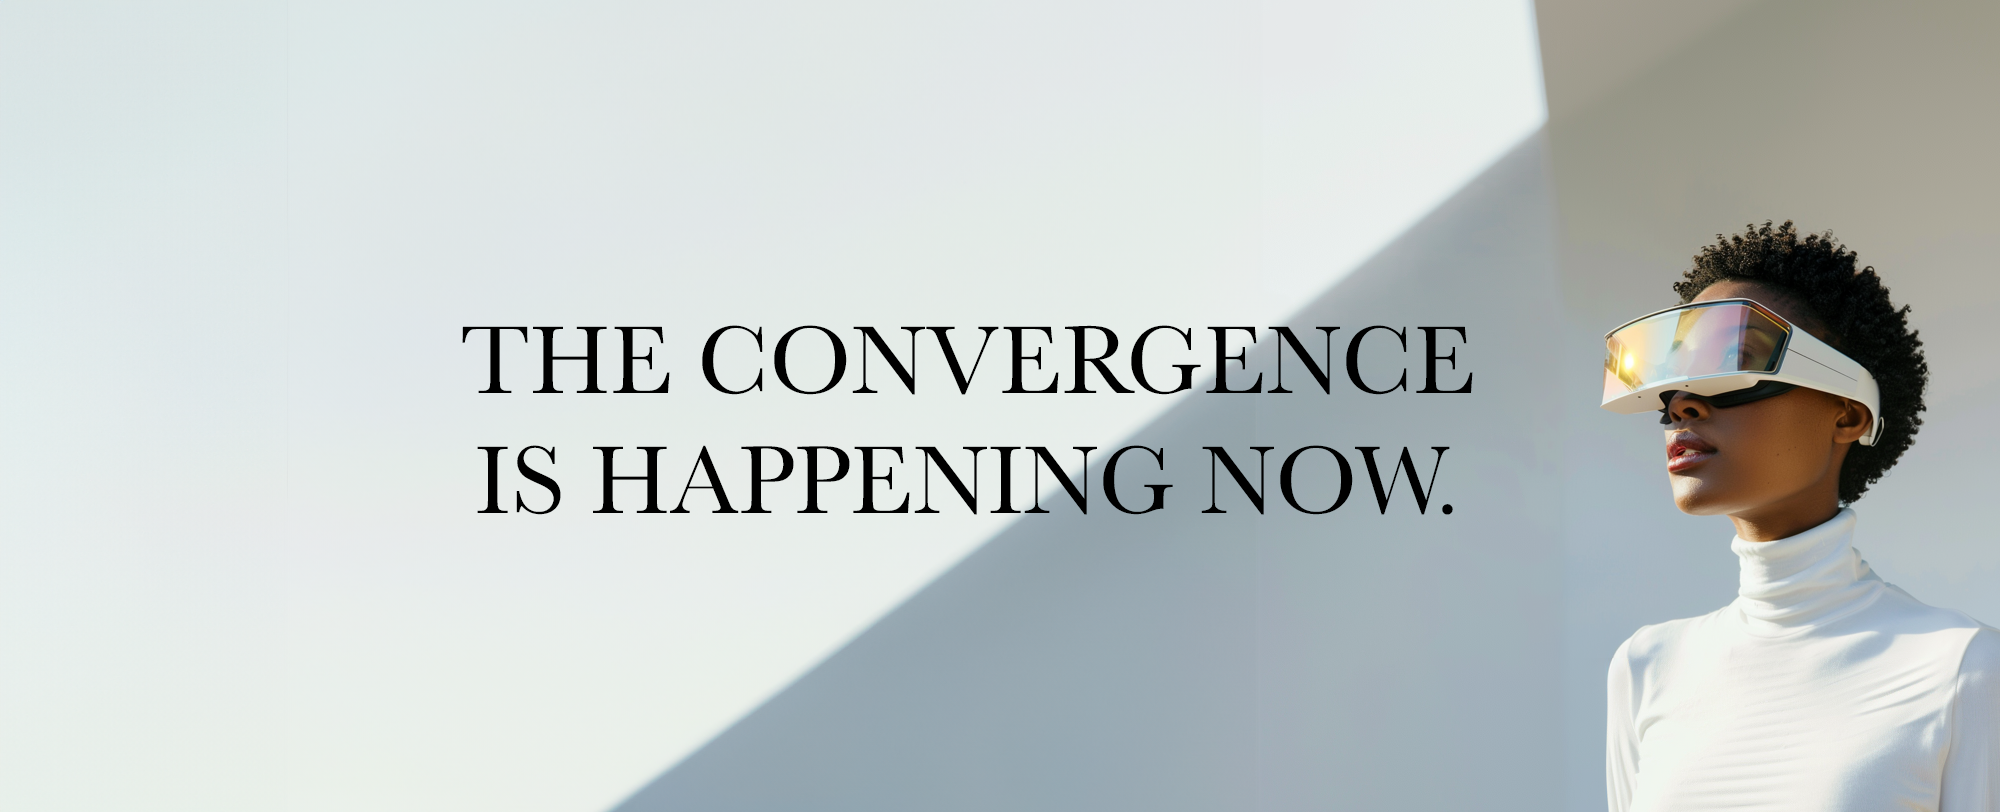 The Convergence is Happening Now